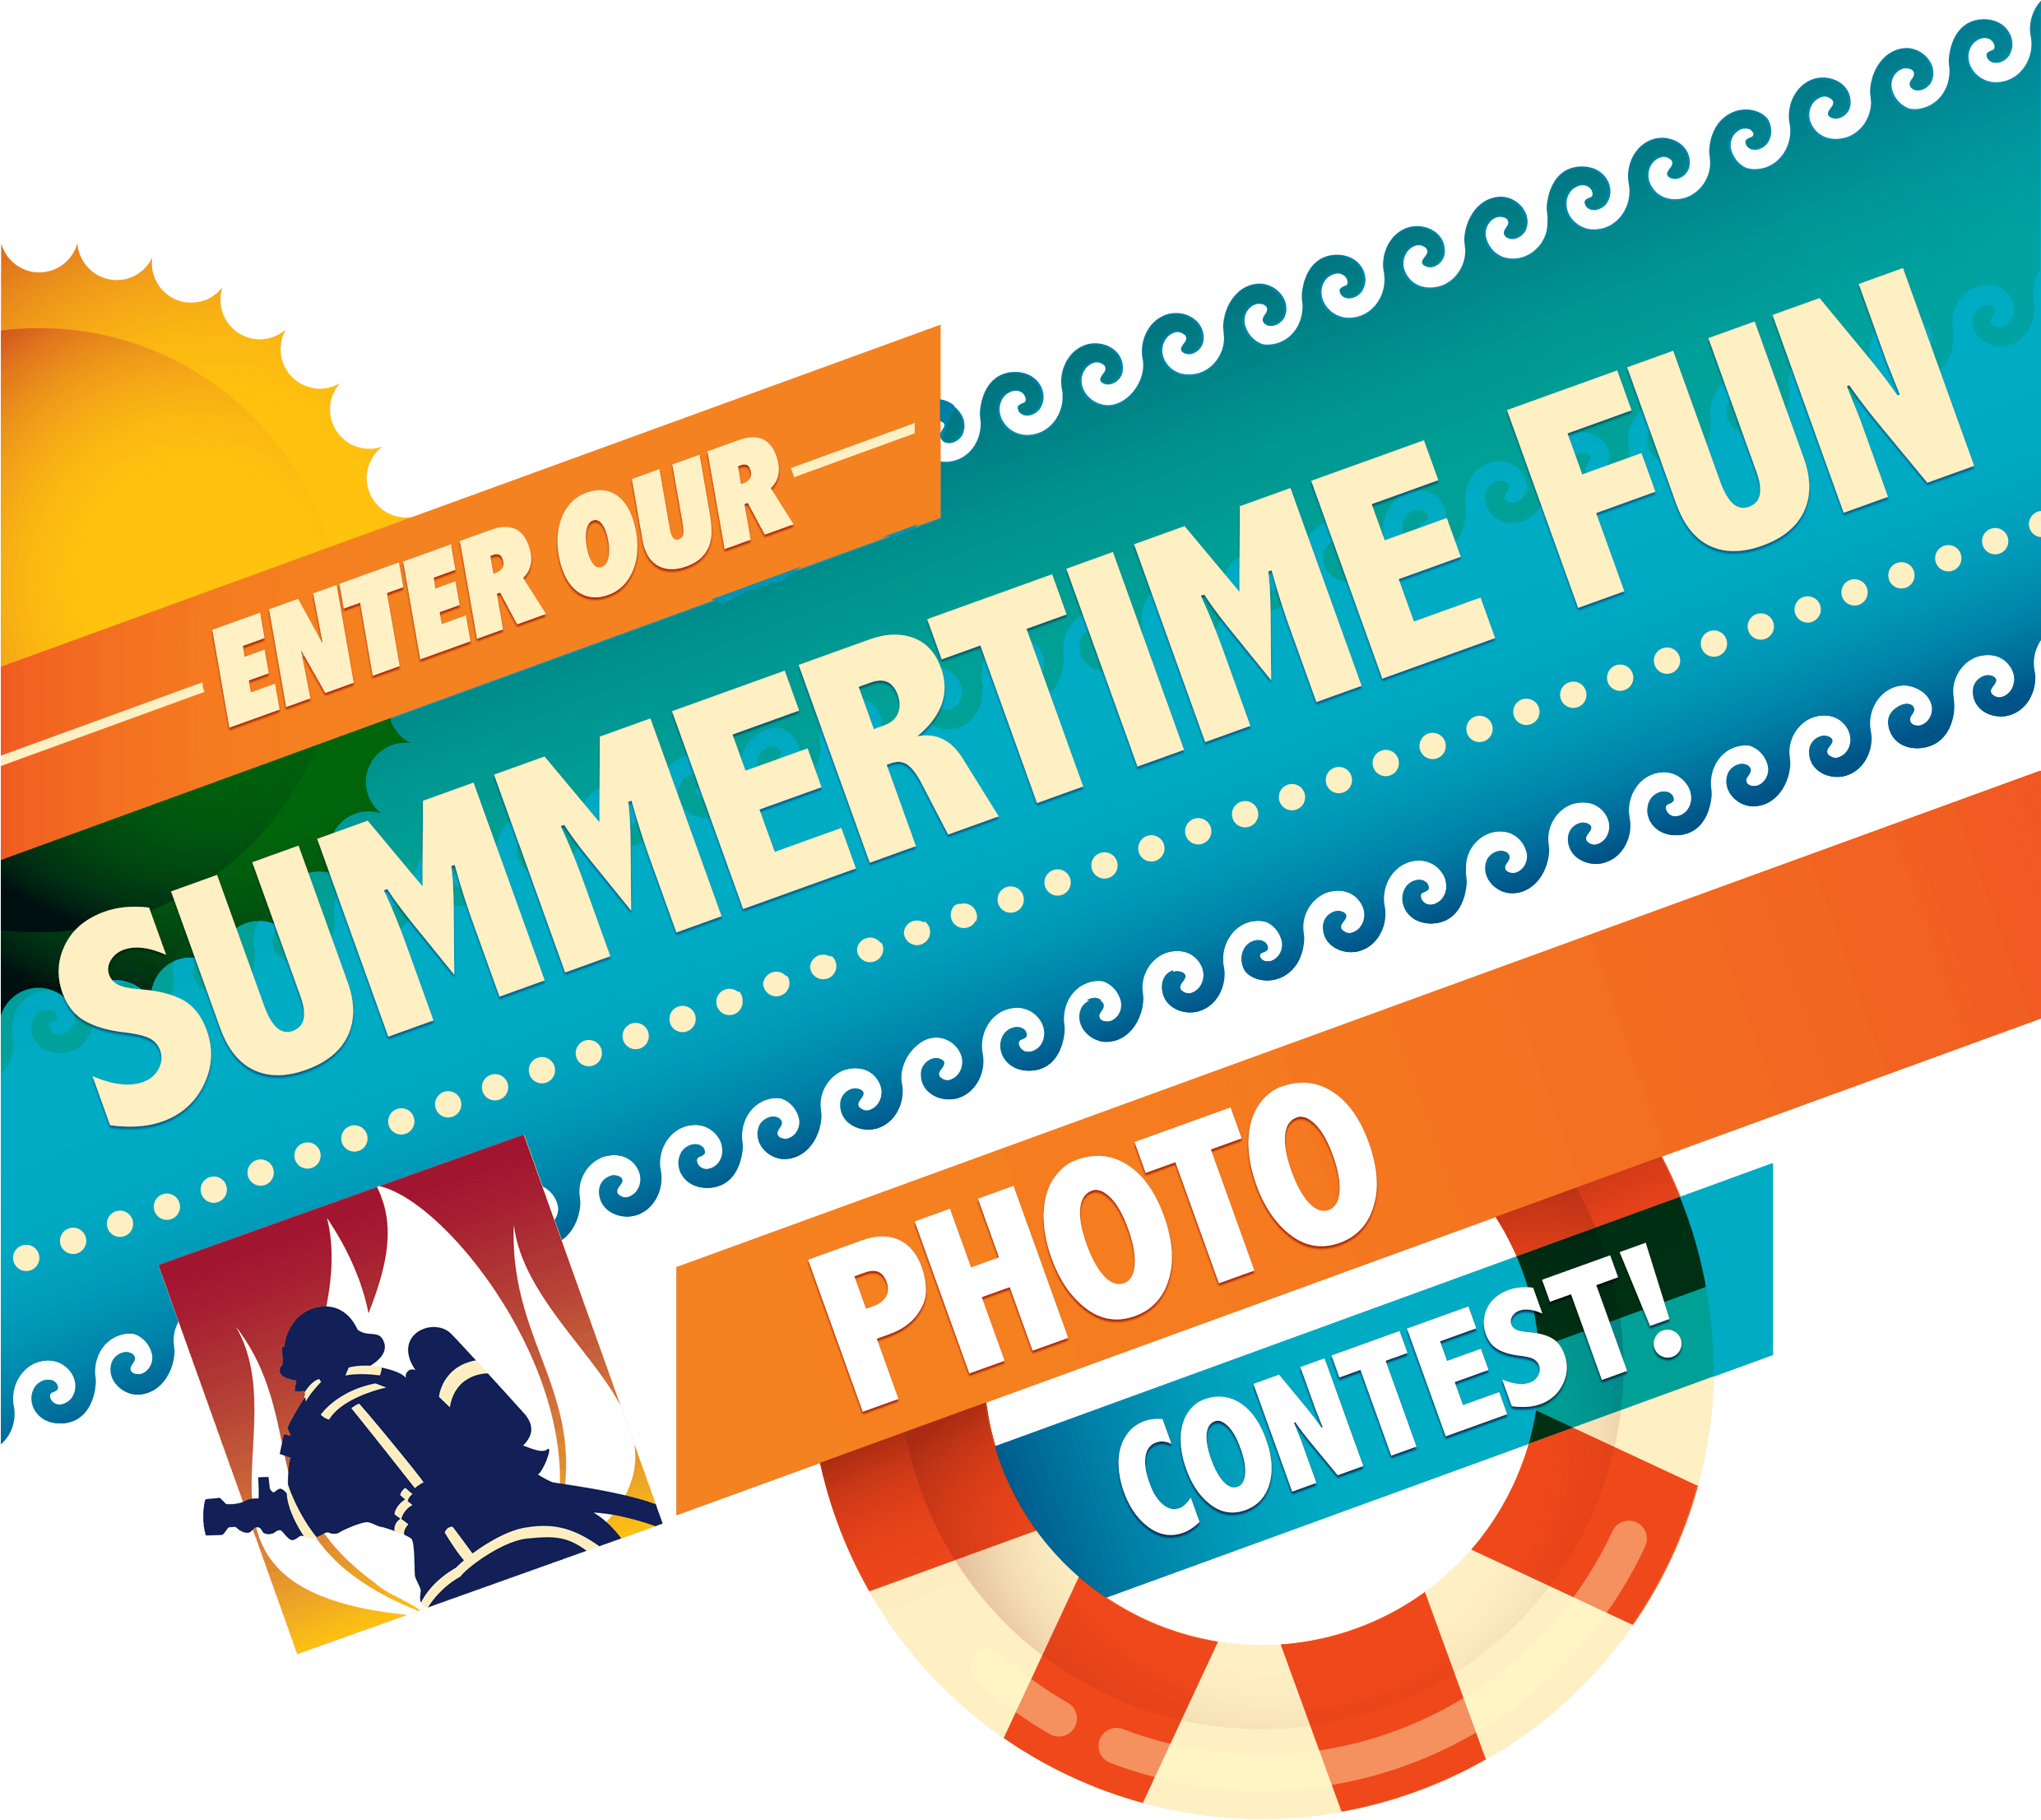 Summertime Fun Photo Contest - Competition (2480x2280)